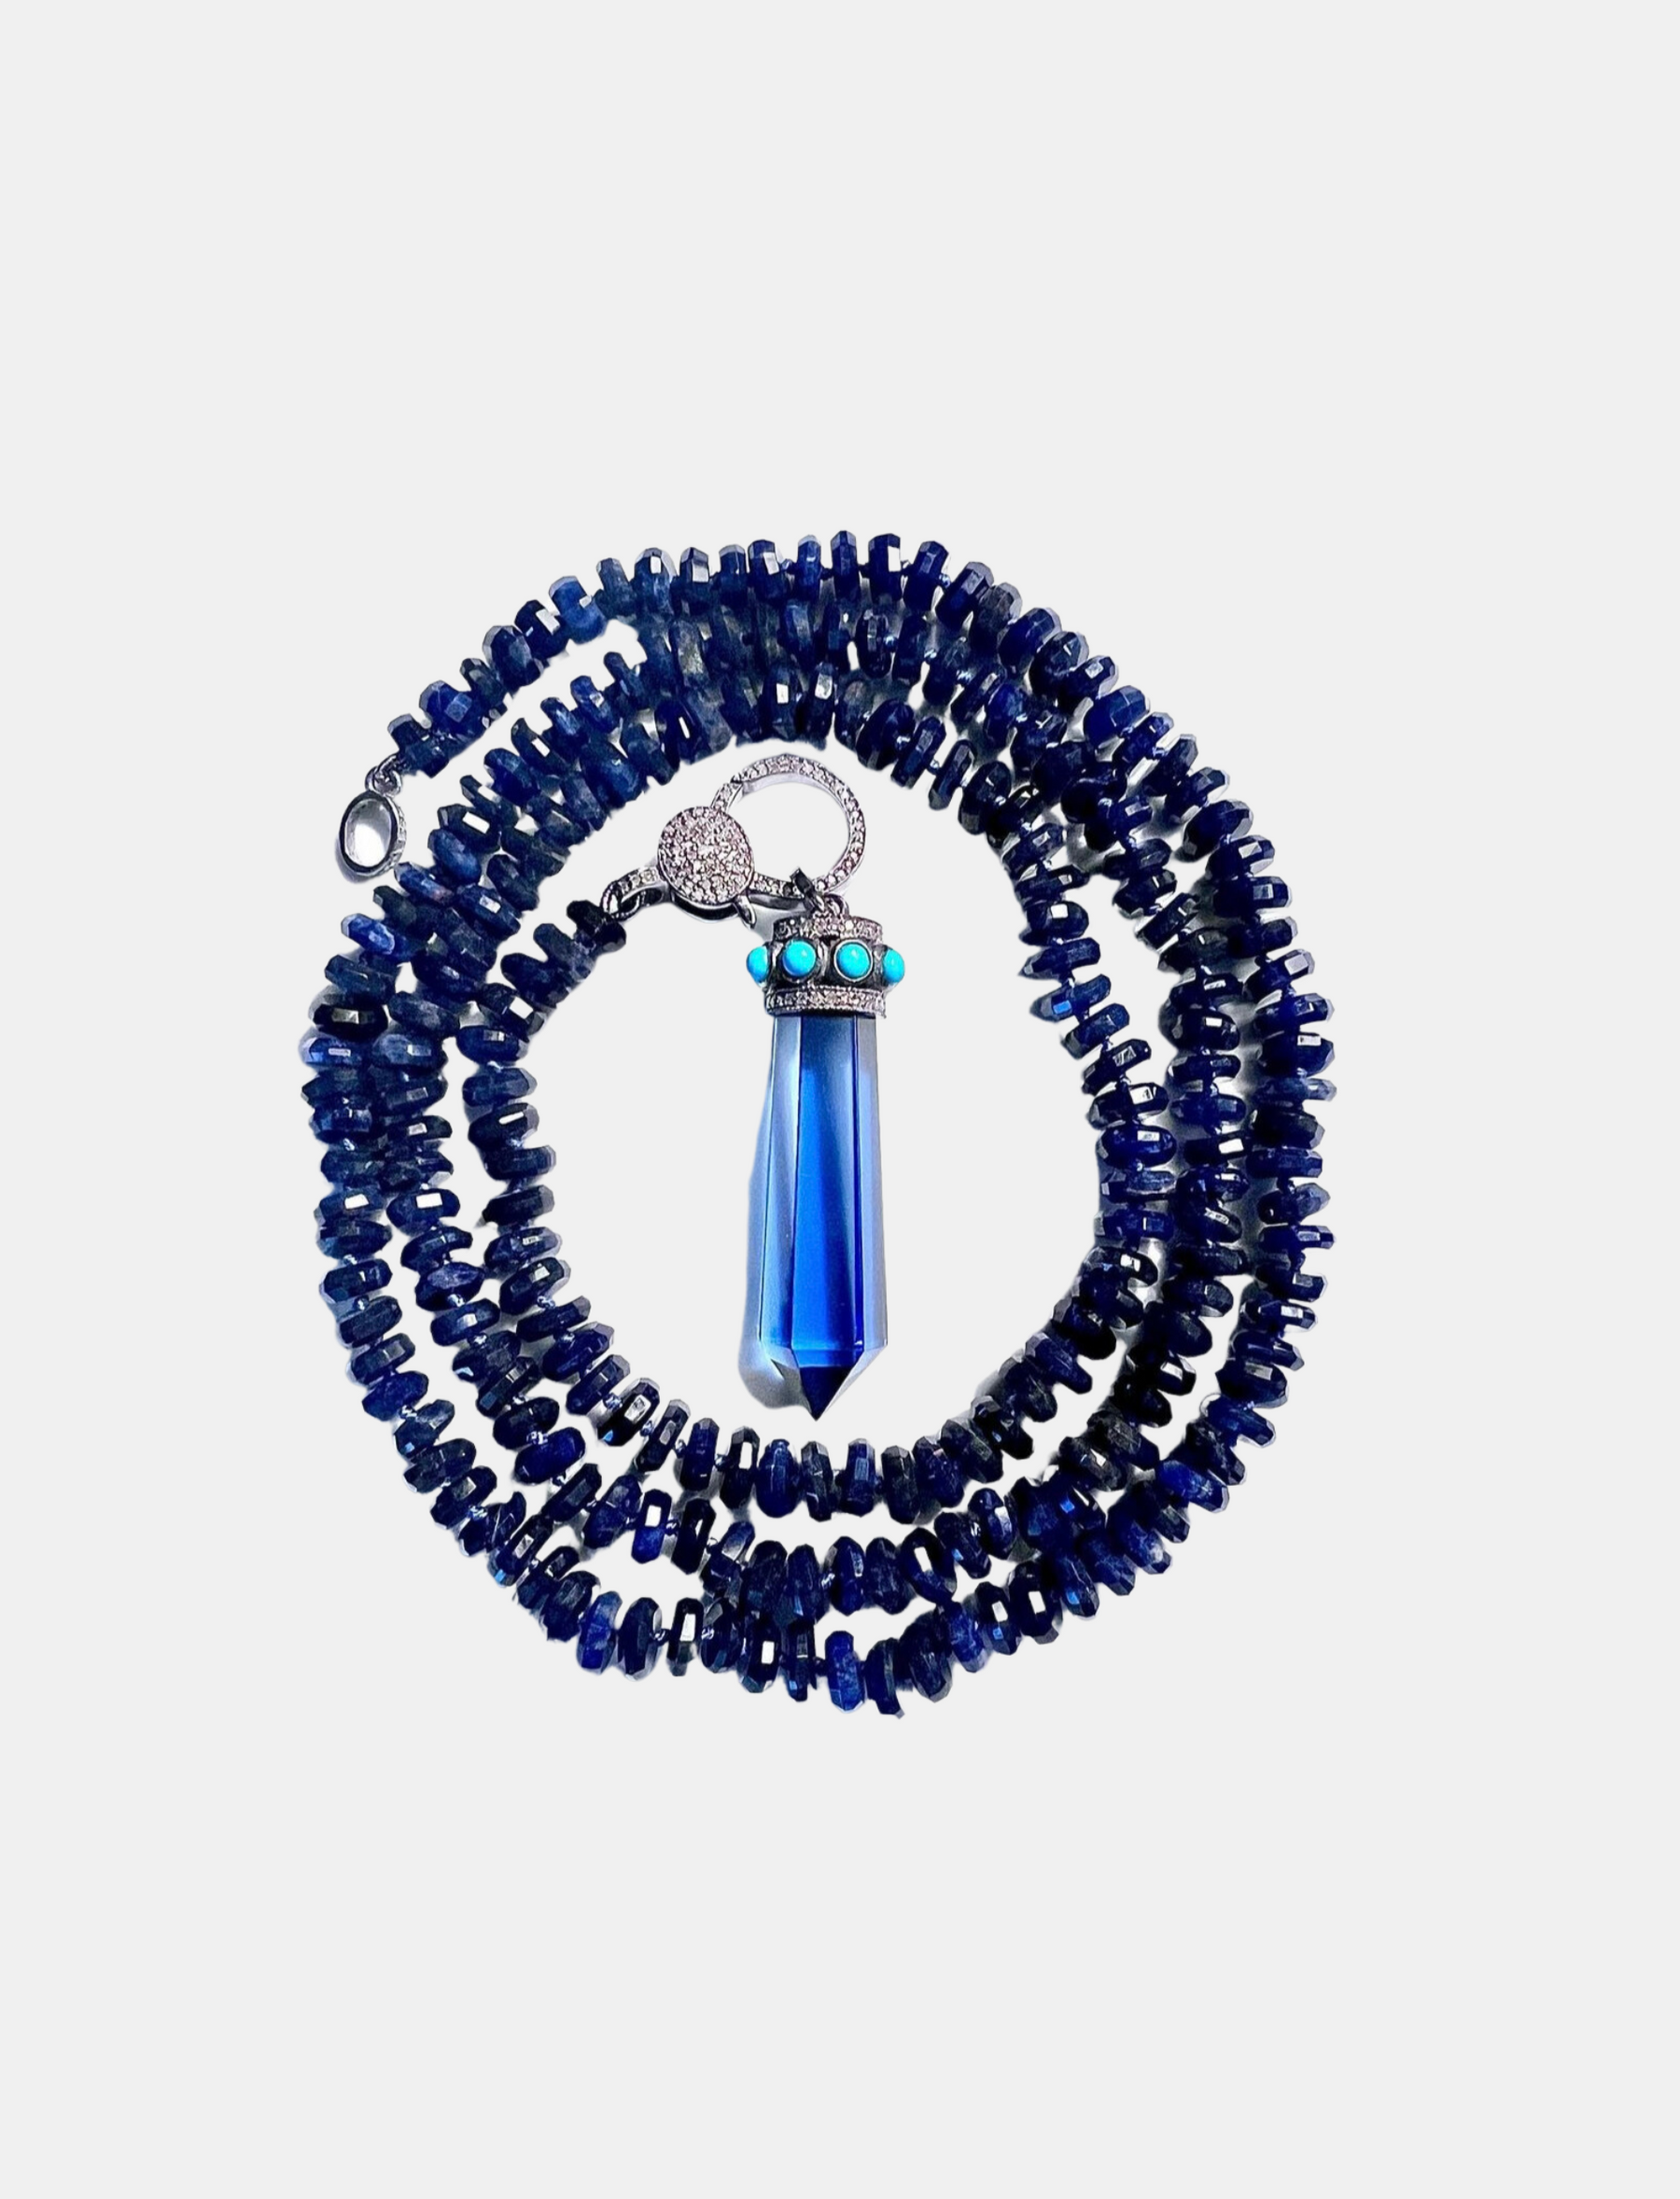 Sodalite Knotted Necklace, Large Pave Diamond Clasp, Pave Diamond & Turquoise Crystal